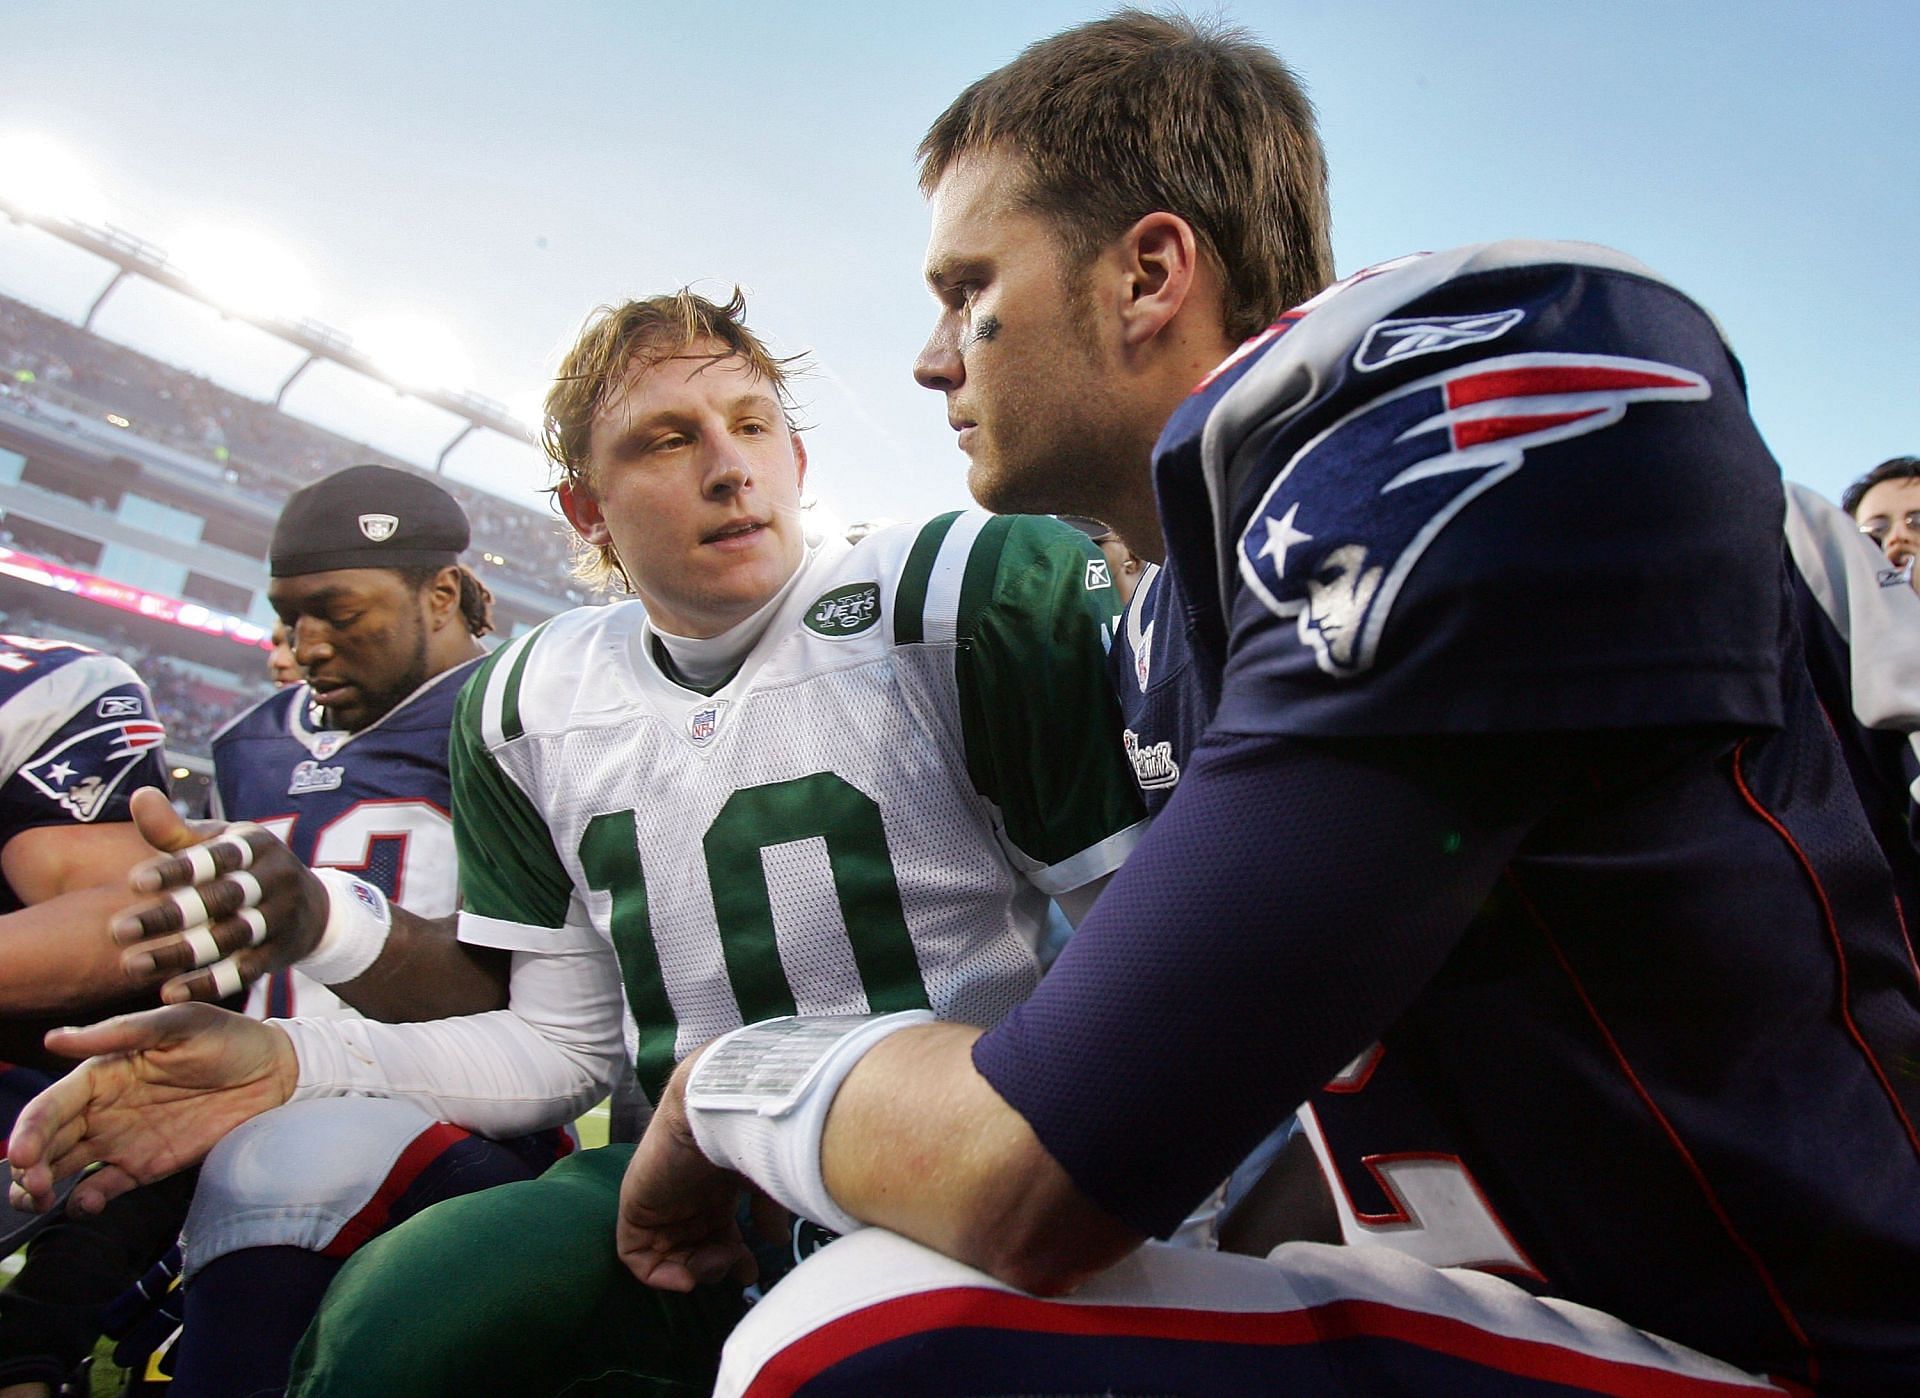 Brady and Pennington engage in prayer after the 2007 AFC Wild Card playoffs (Photo: Getty)